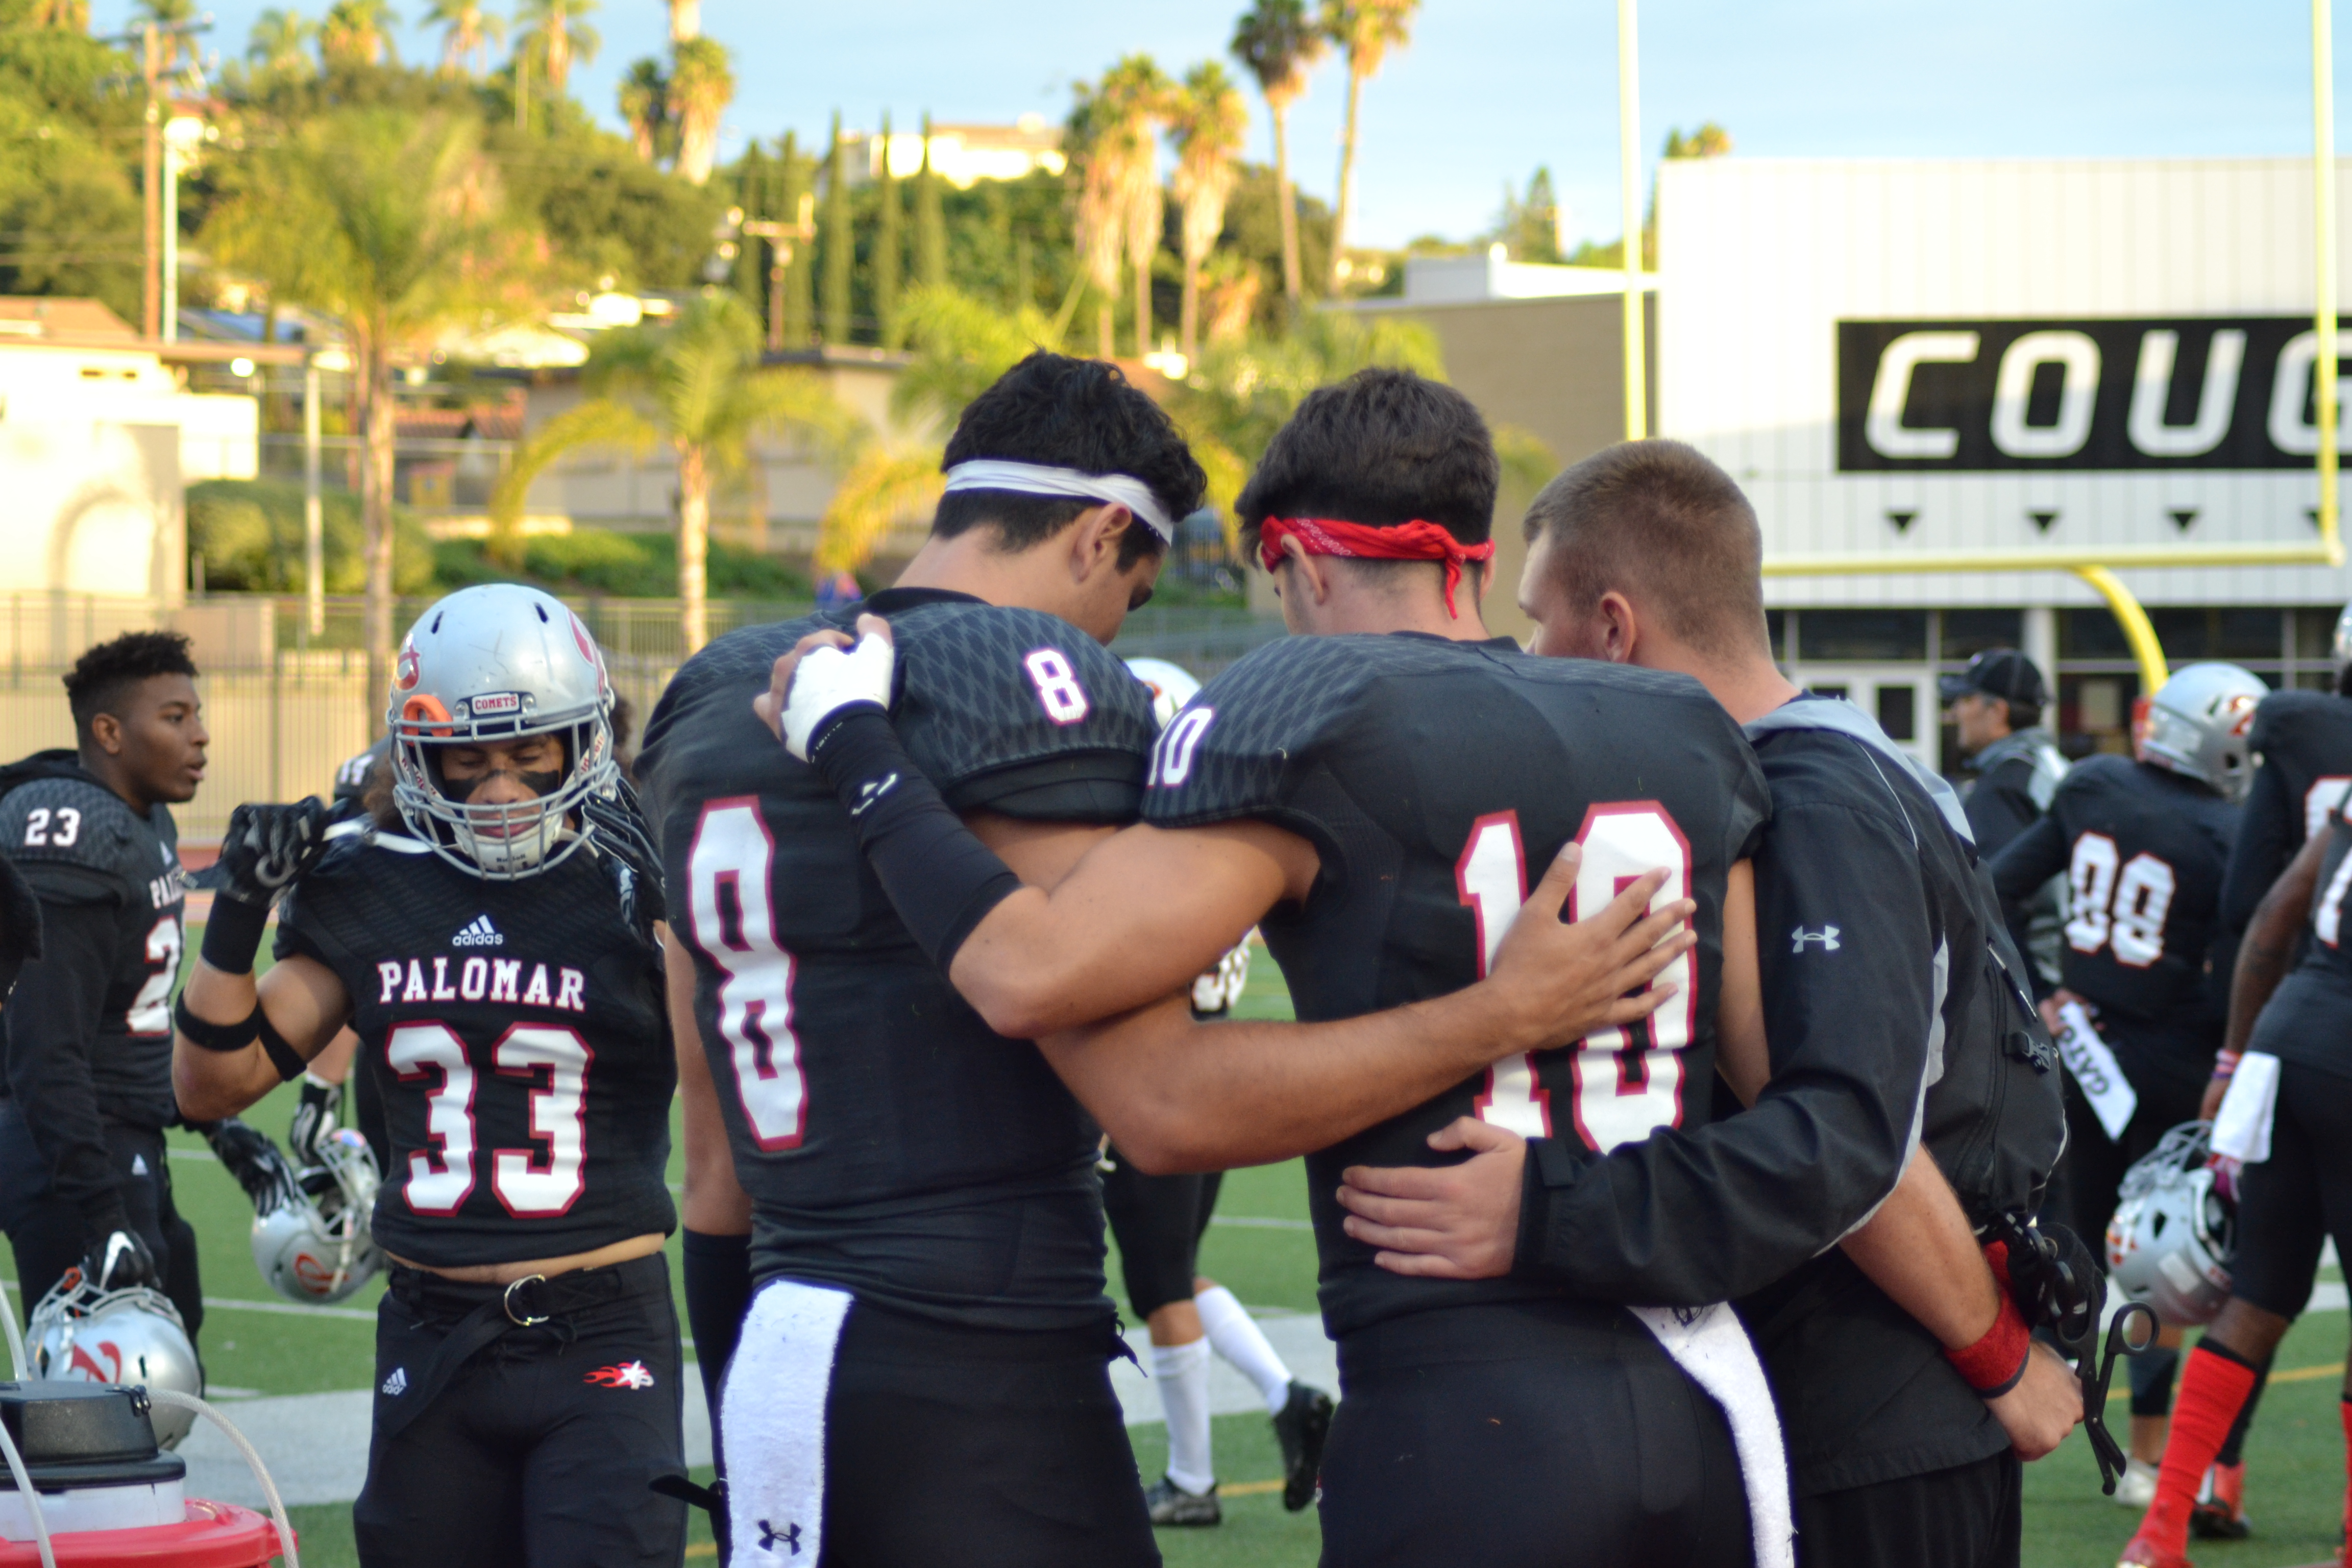 Palomar Comets huddle after a match. (Krista Moore/The Telescope)